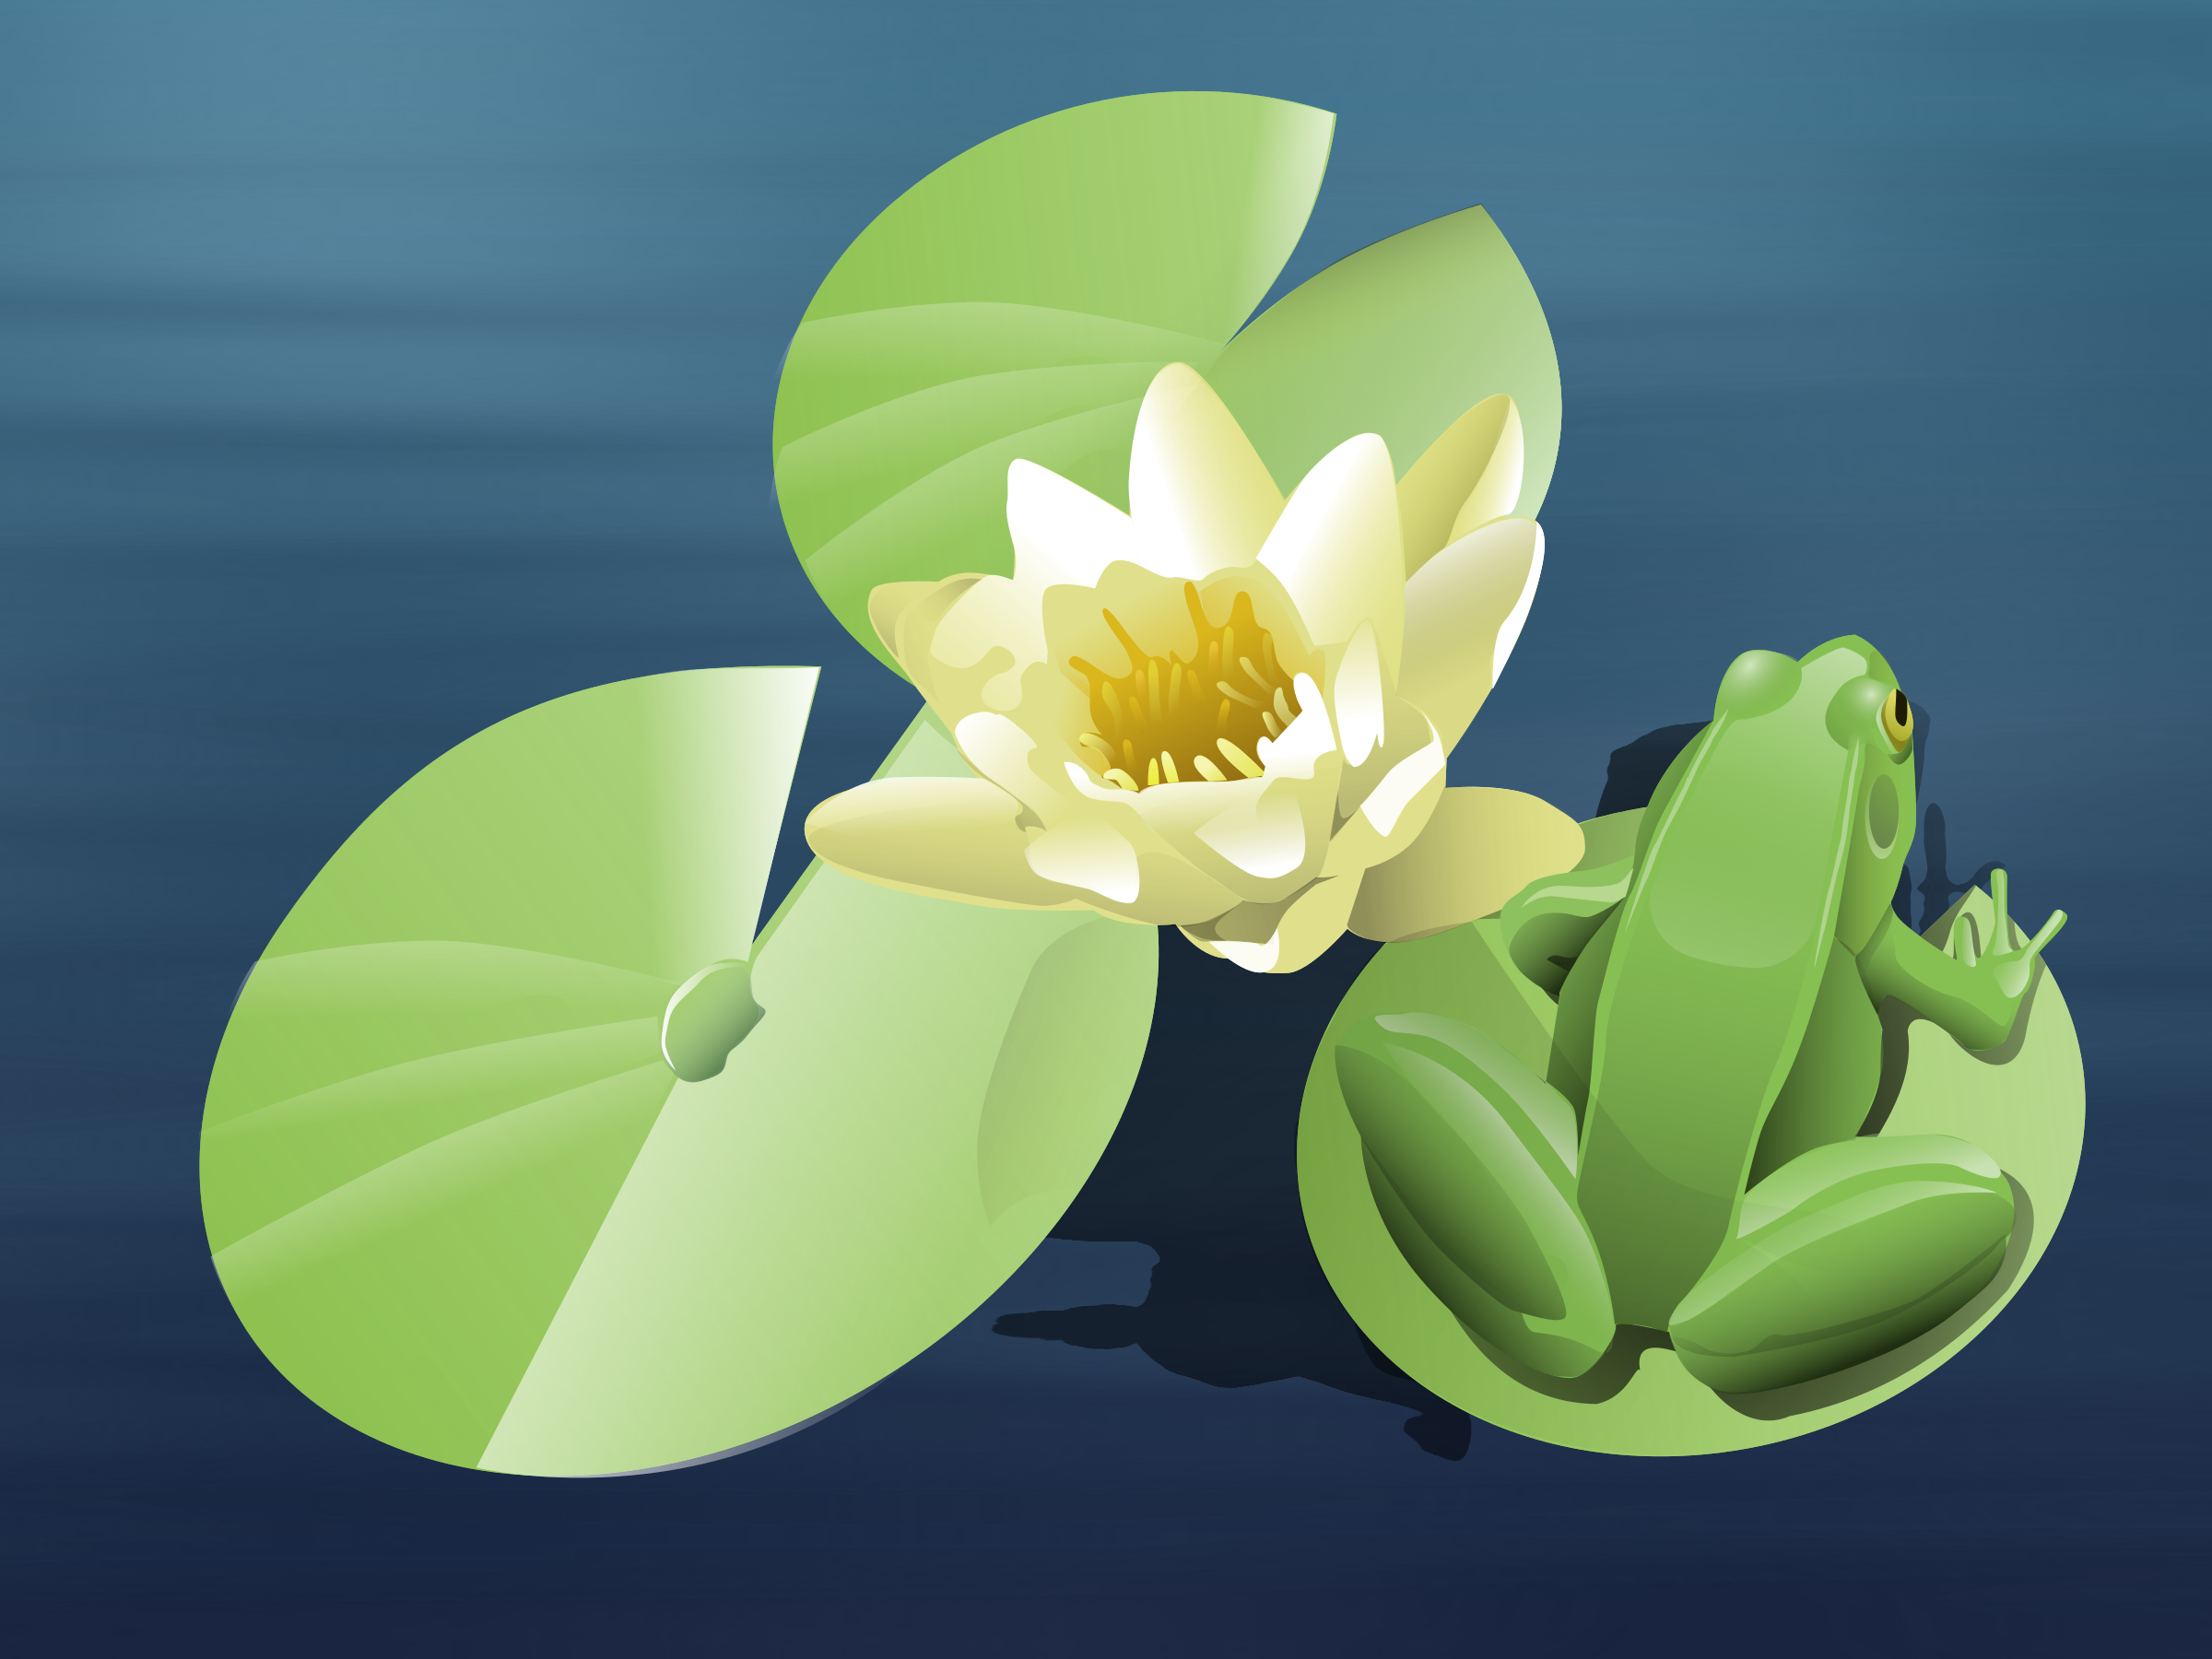 This Free Icons Png Design Of Frog On A Lily Pad (Animated) Hdpng.com  - Frog On Lily Pad, Transparent background PNG HD thumbnail